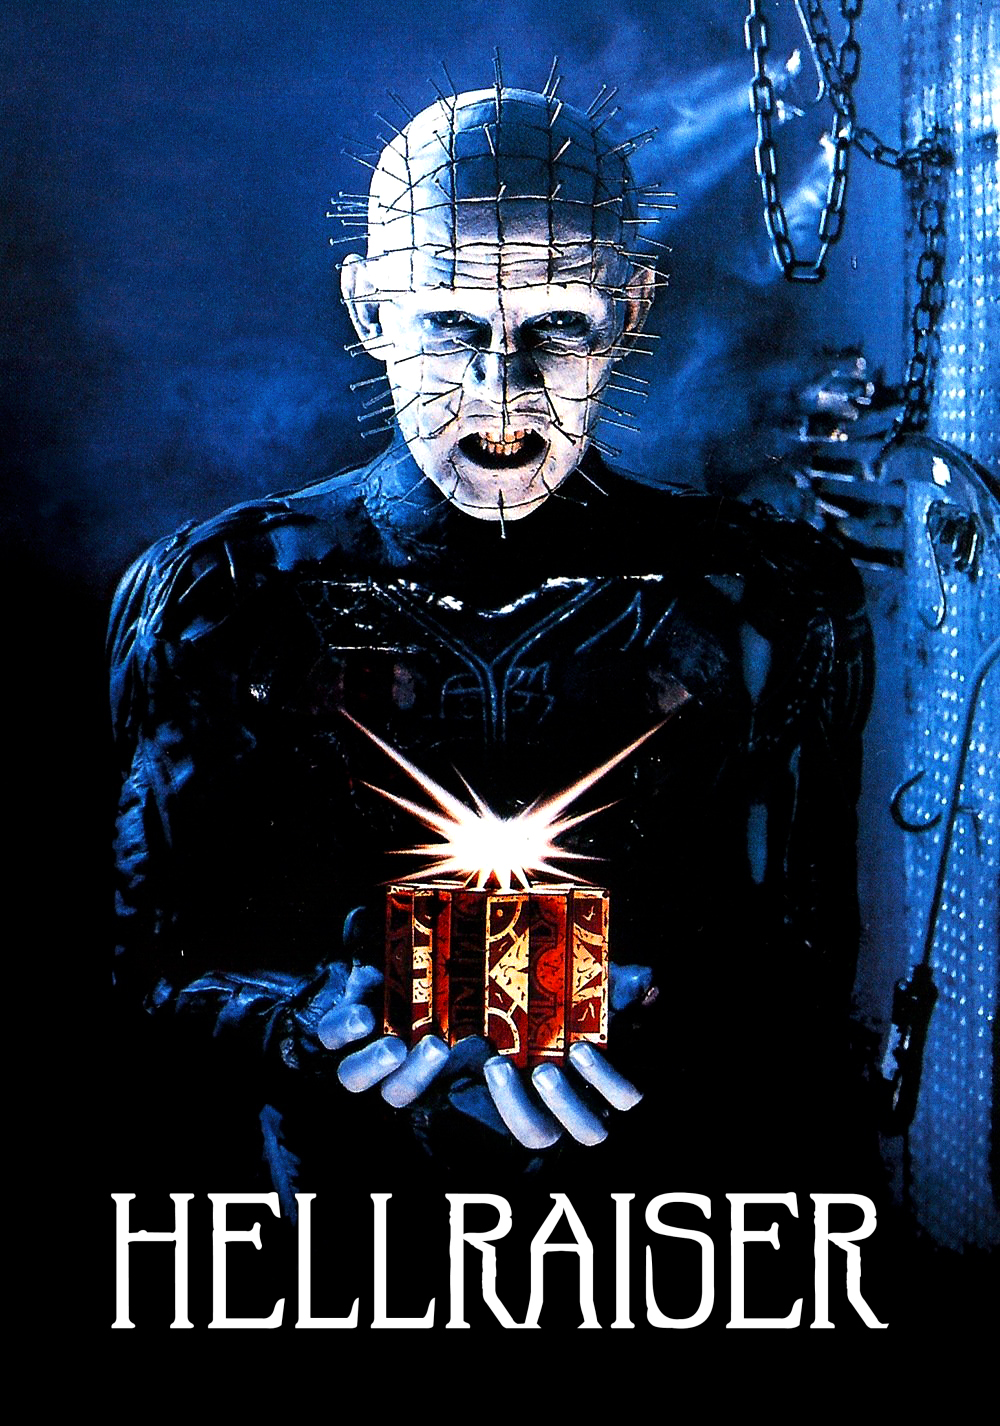 What is your overall review of the original Hellraiser which I have not  watched? - Quora